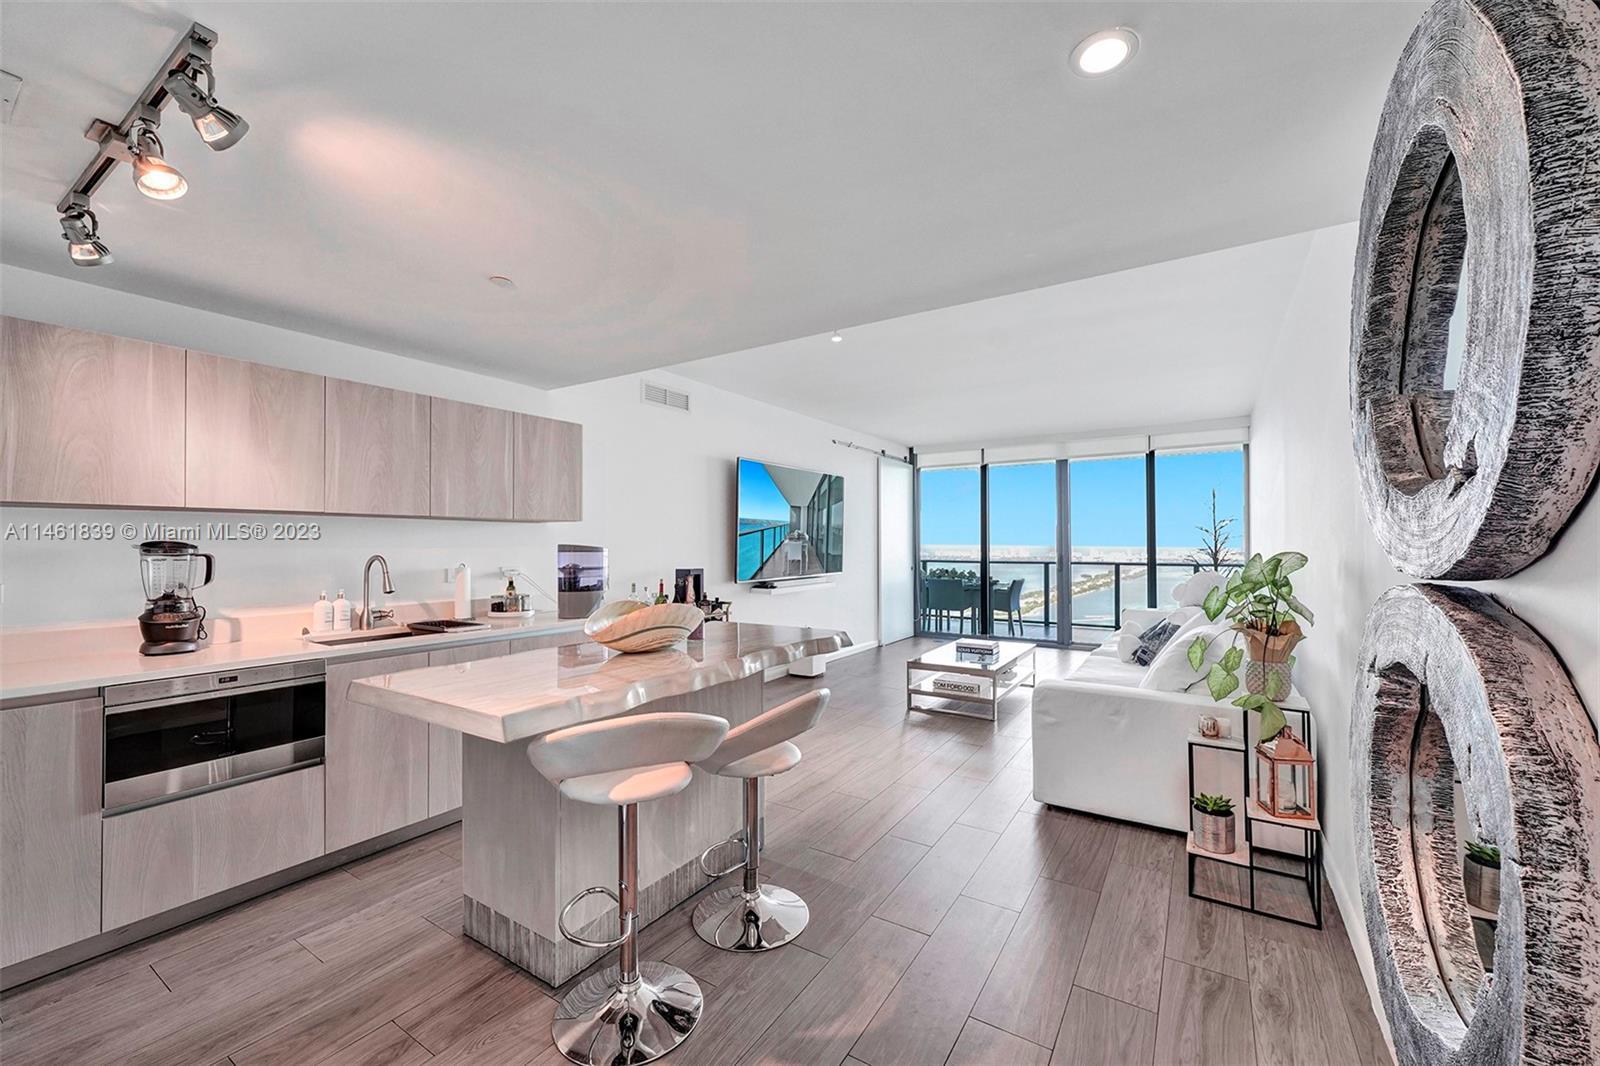 This gorgeous 47th floor 3 bdrm/3.5 bath with den condo has one of the best views Miami has to offer